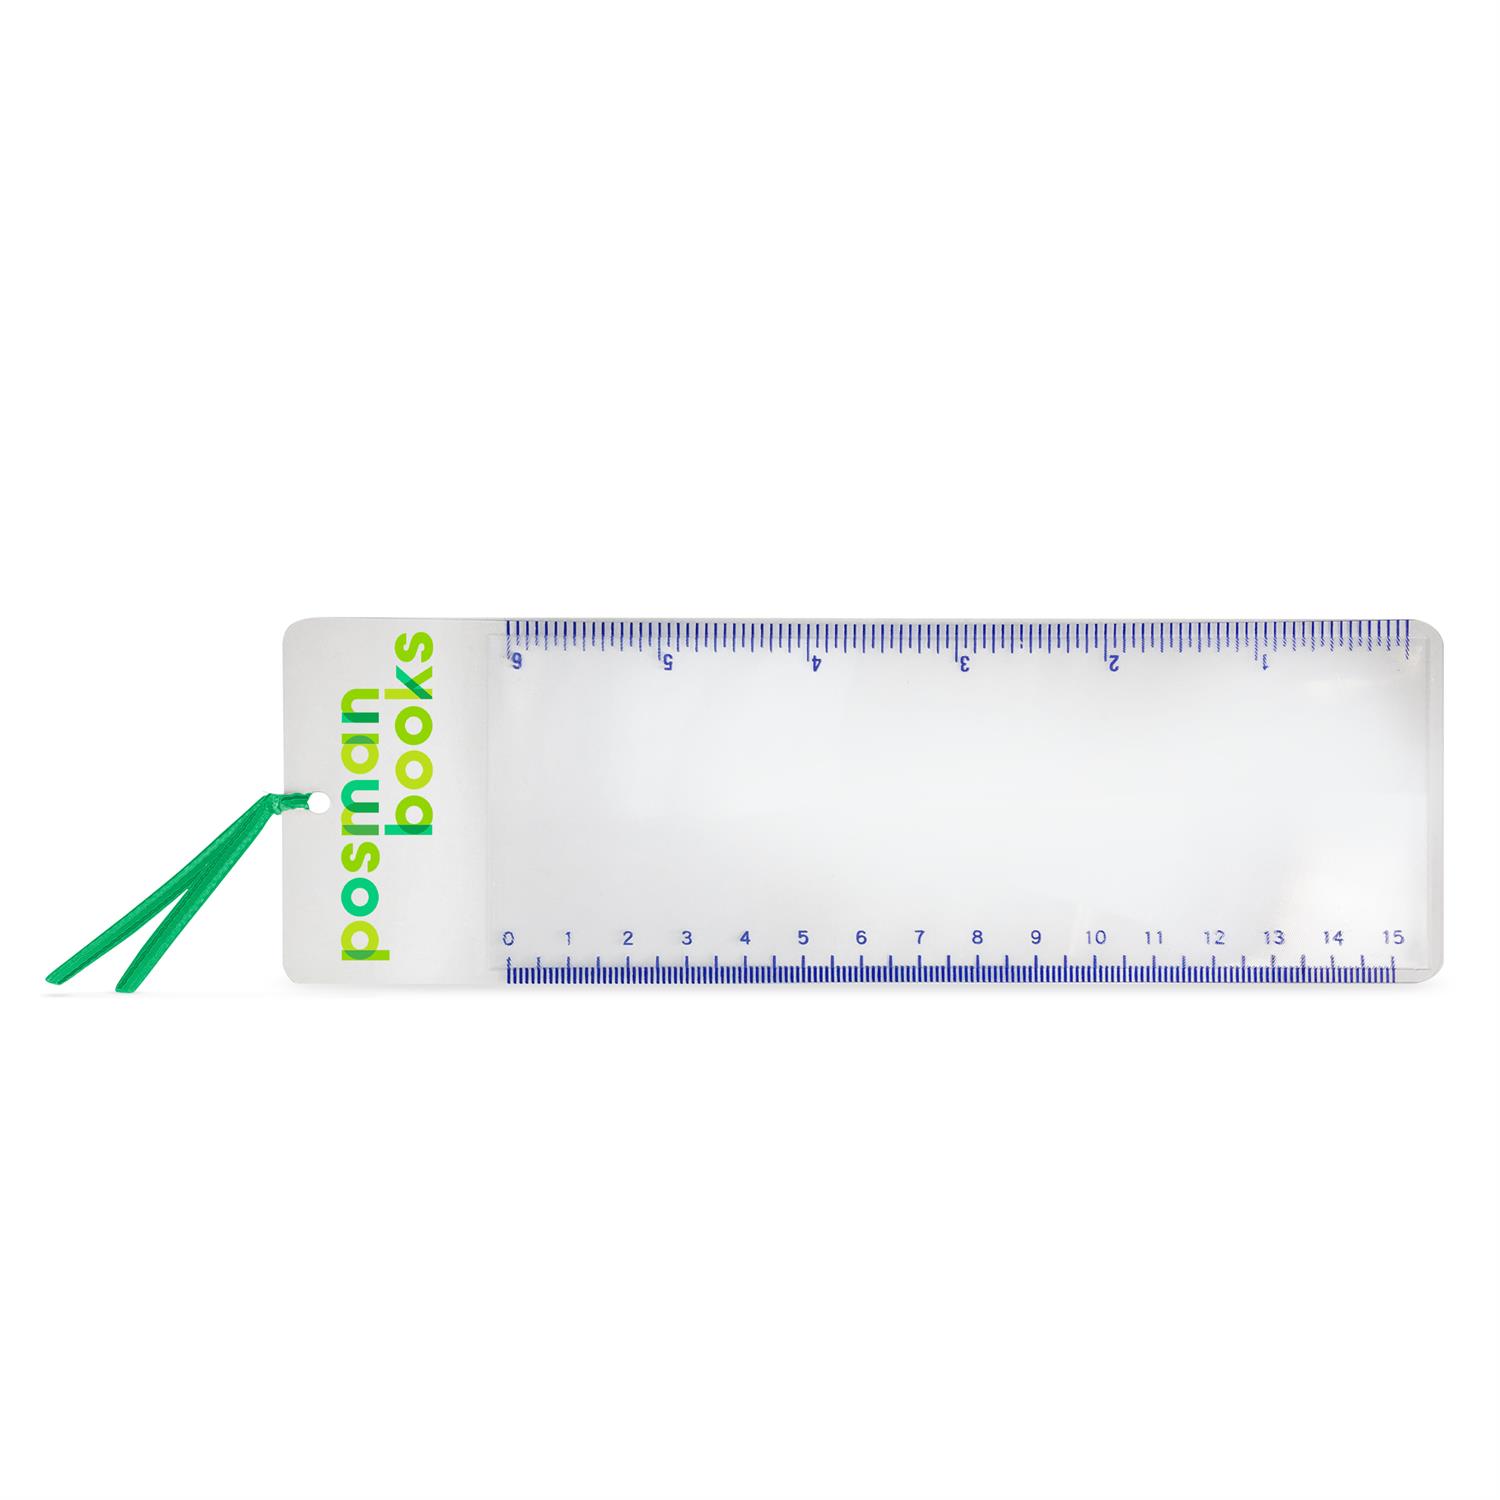 D1202 - Page Marker Magnifier with Green Tassle